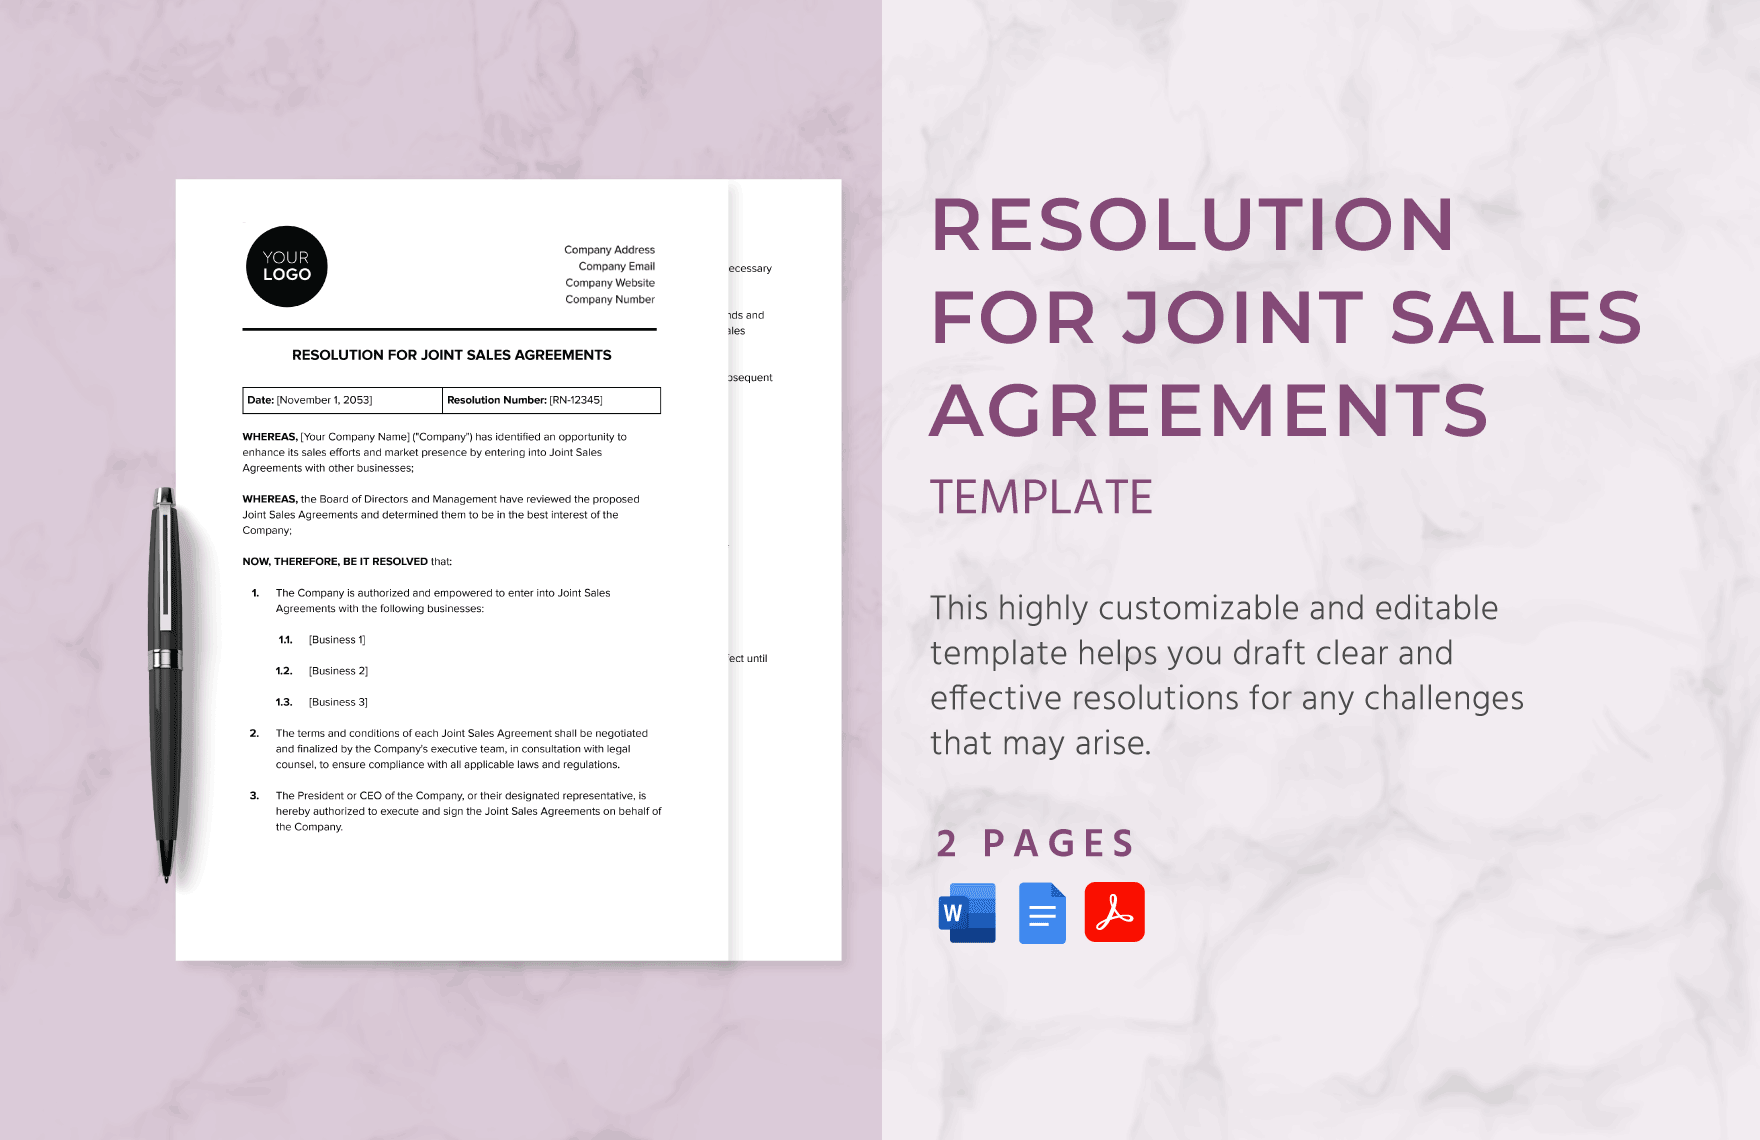 Resolution for Joint Sales Agreements Template in Word, Google Docs, PDF